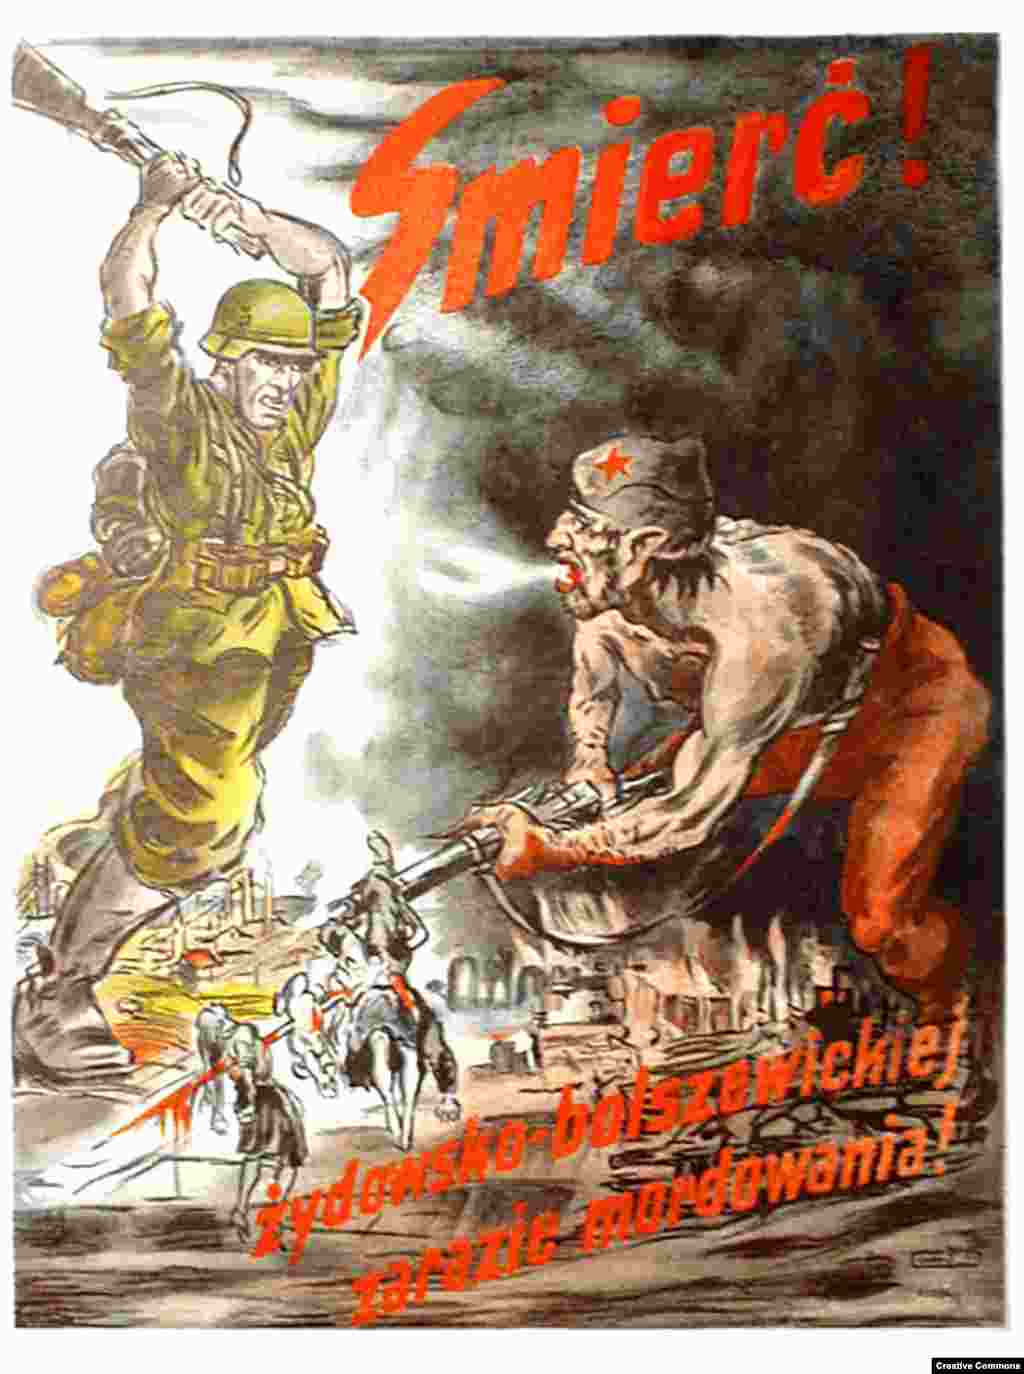 A Nazi propaganda poster declaring &quot;death to the Jewish-Bolshevik pestilence of murdering.&quot; As well as executions at the hands of the Soviet secret police, millions of Ukrainians had died under Stalin in&nbsp;a man-made famine. Nazi propaganda linking Jews with Soviet rule fed the beliefs of some elements of the Ukrainian nationalist movement in a region with a history of anti-Semitic violence.&nbsp;